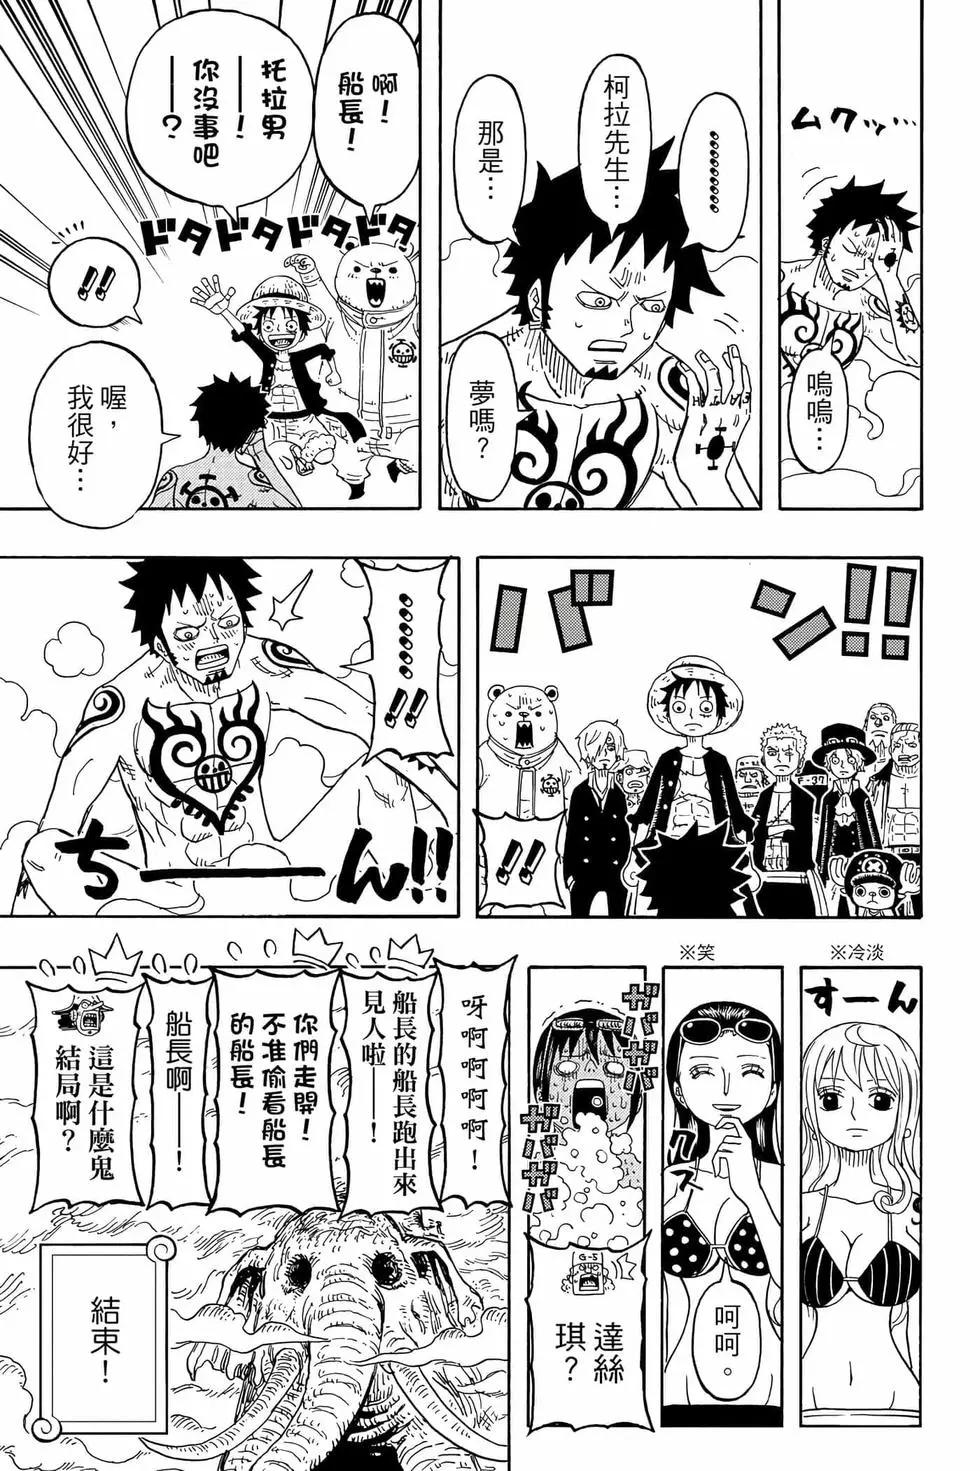 One piece party - 第05卷(1/4) - 6